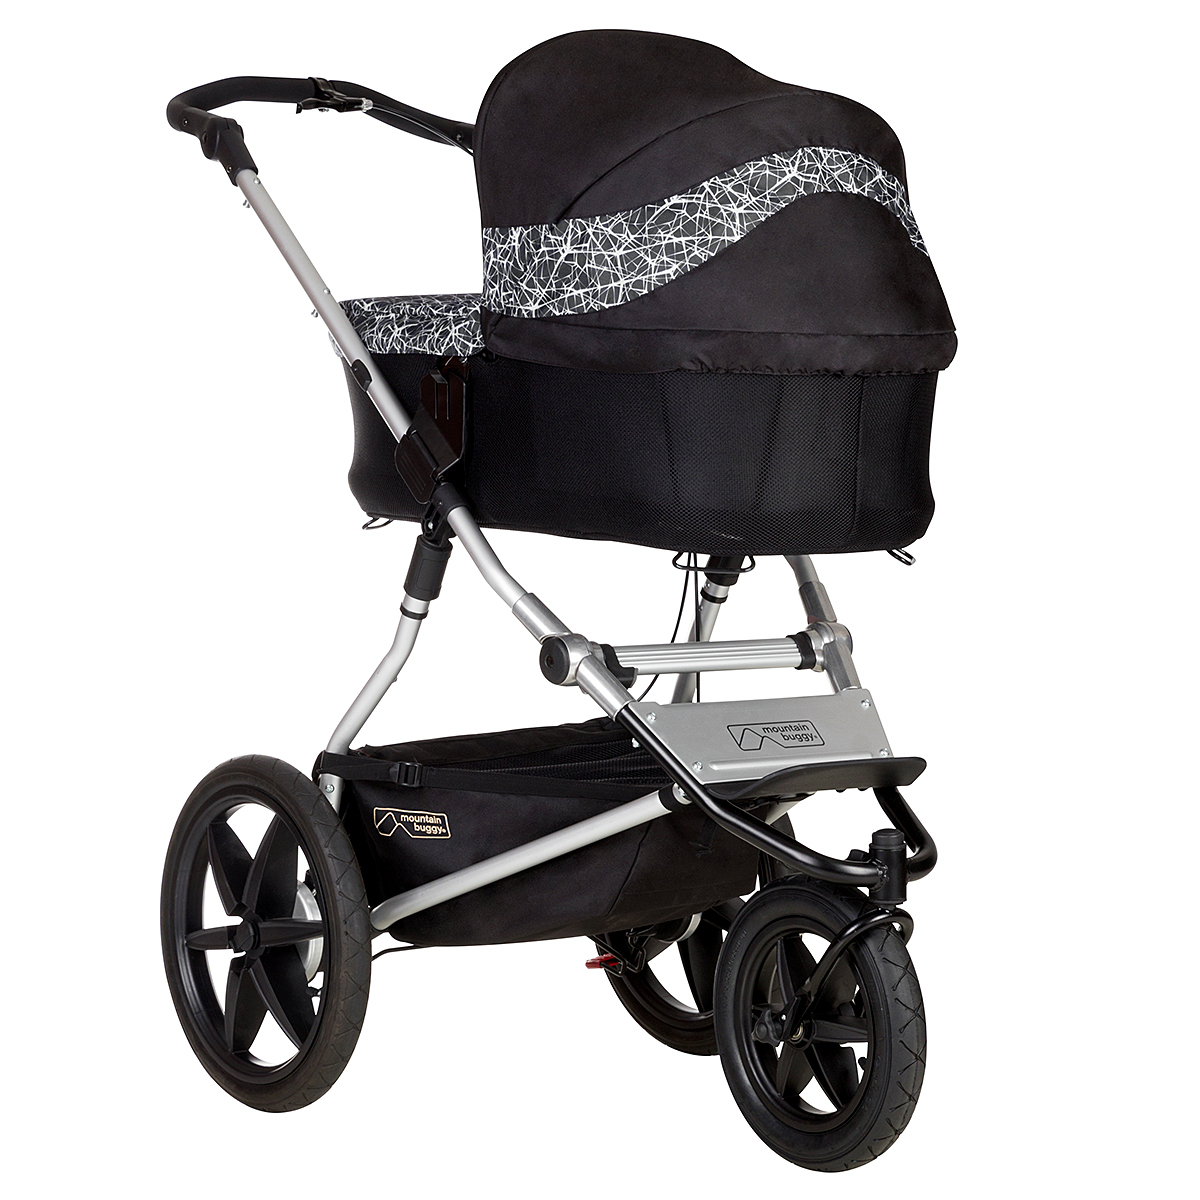 Buggy Suitable From Birth Hot Sale, 50% OFF | www.industrimat-fermetures.fr